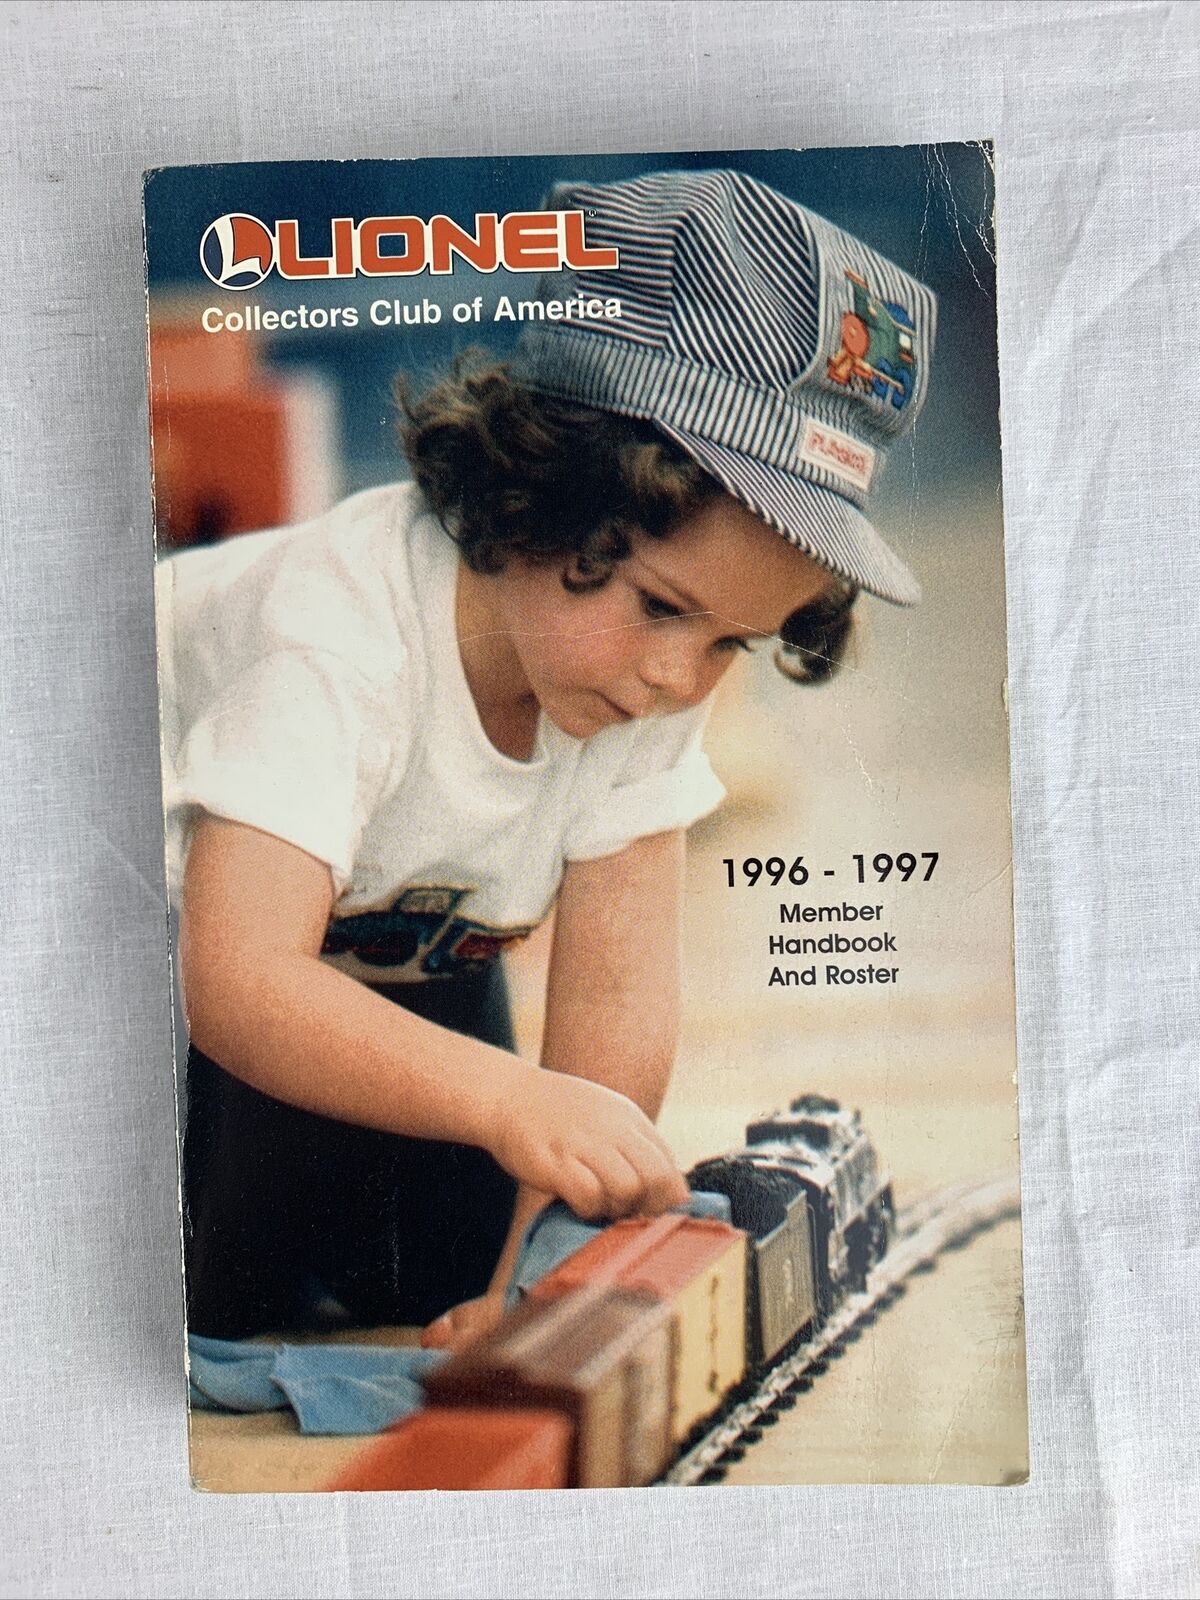 Lionel Collectors Club of America 1996 - 1997 Member Handbook and Roster